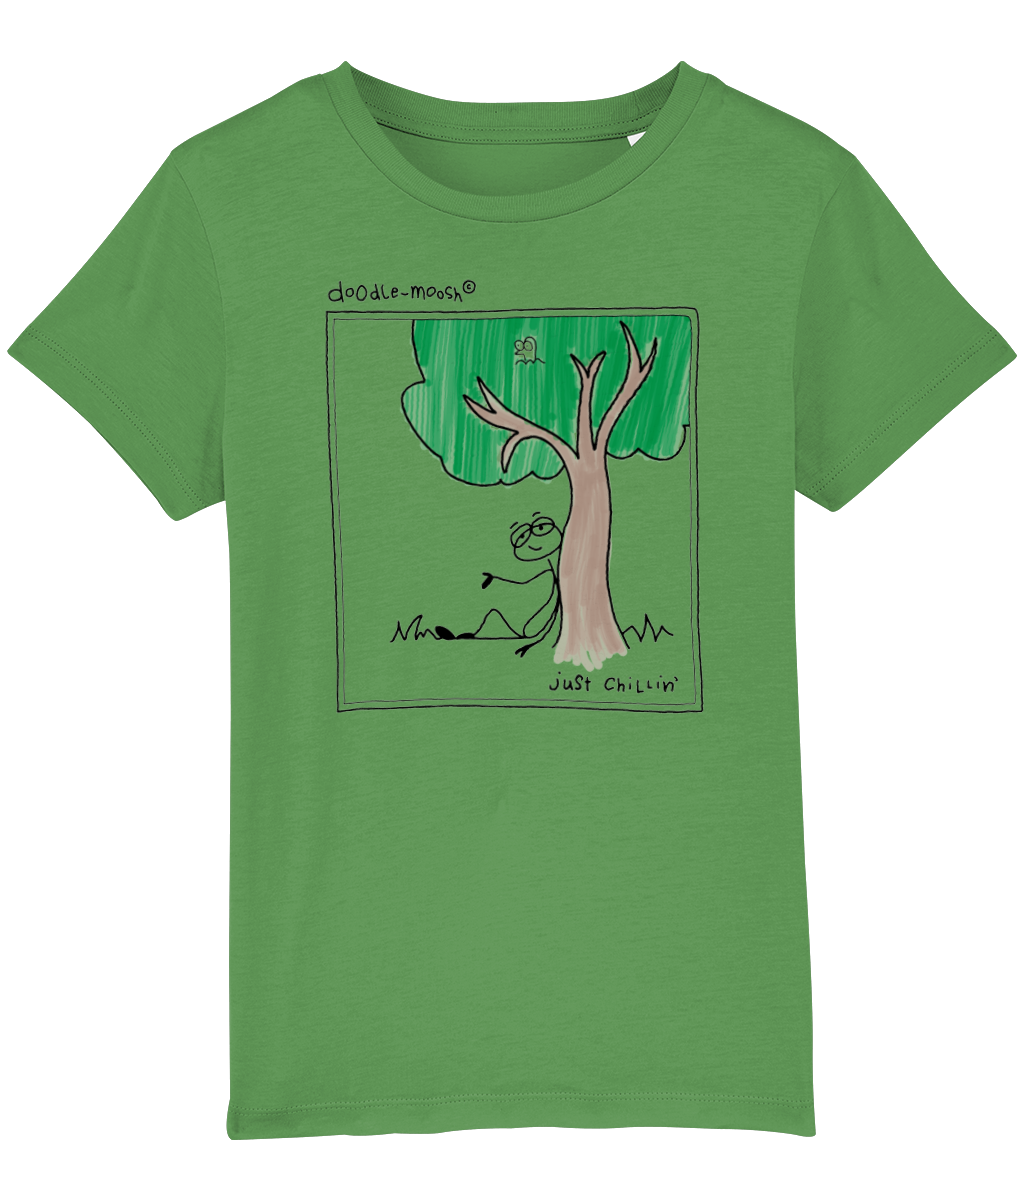 Just chilling t-shirt, green with black, colorful drawing